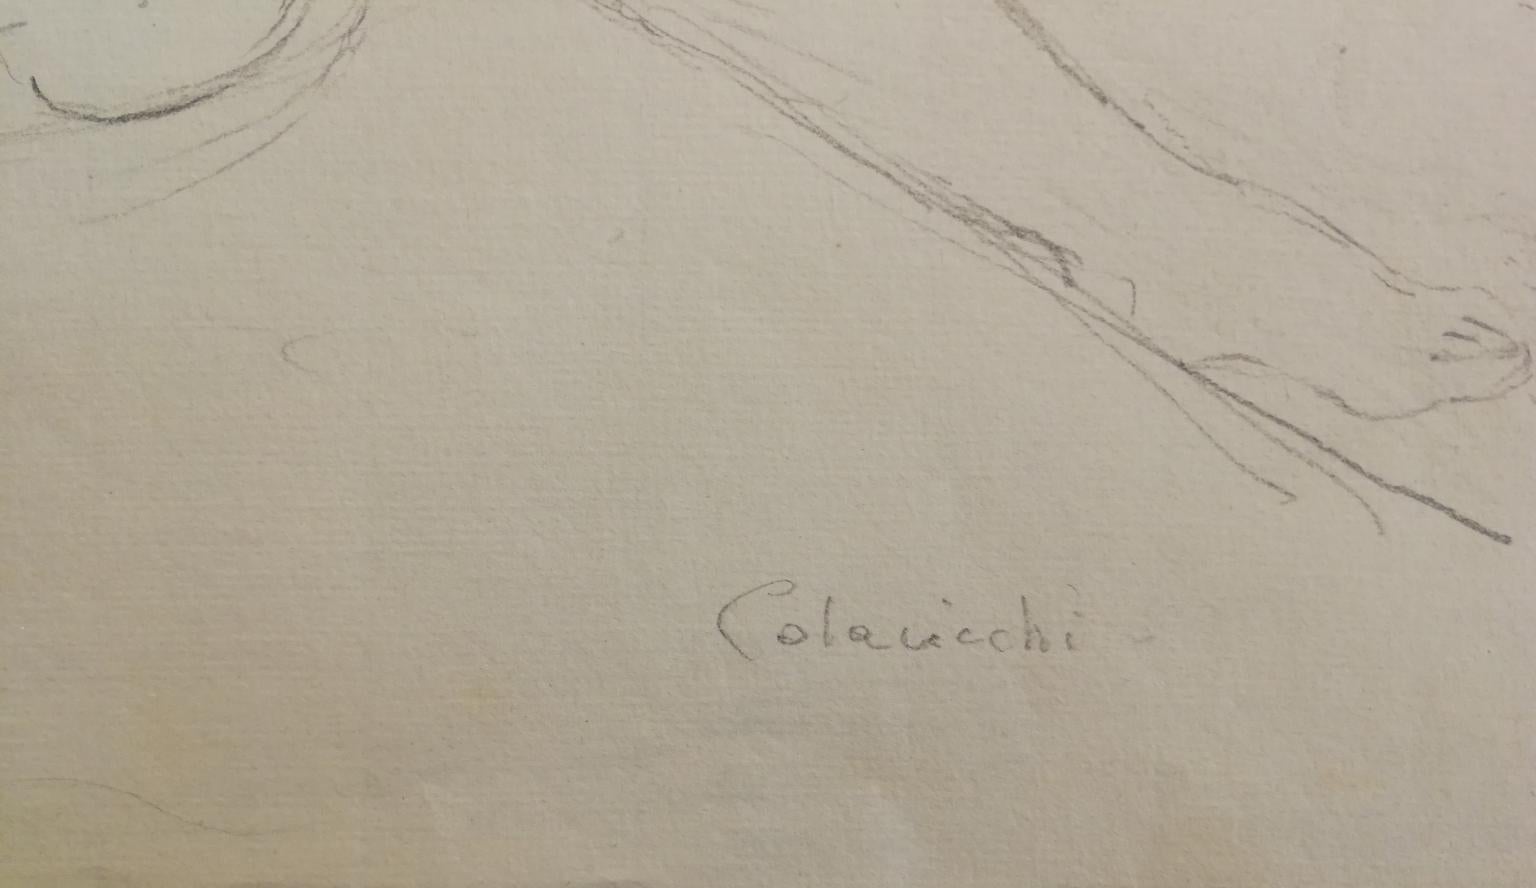 Signed Colacicchi Male Nude Drawing Mid-20 century pencil on paper  1